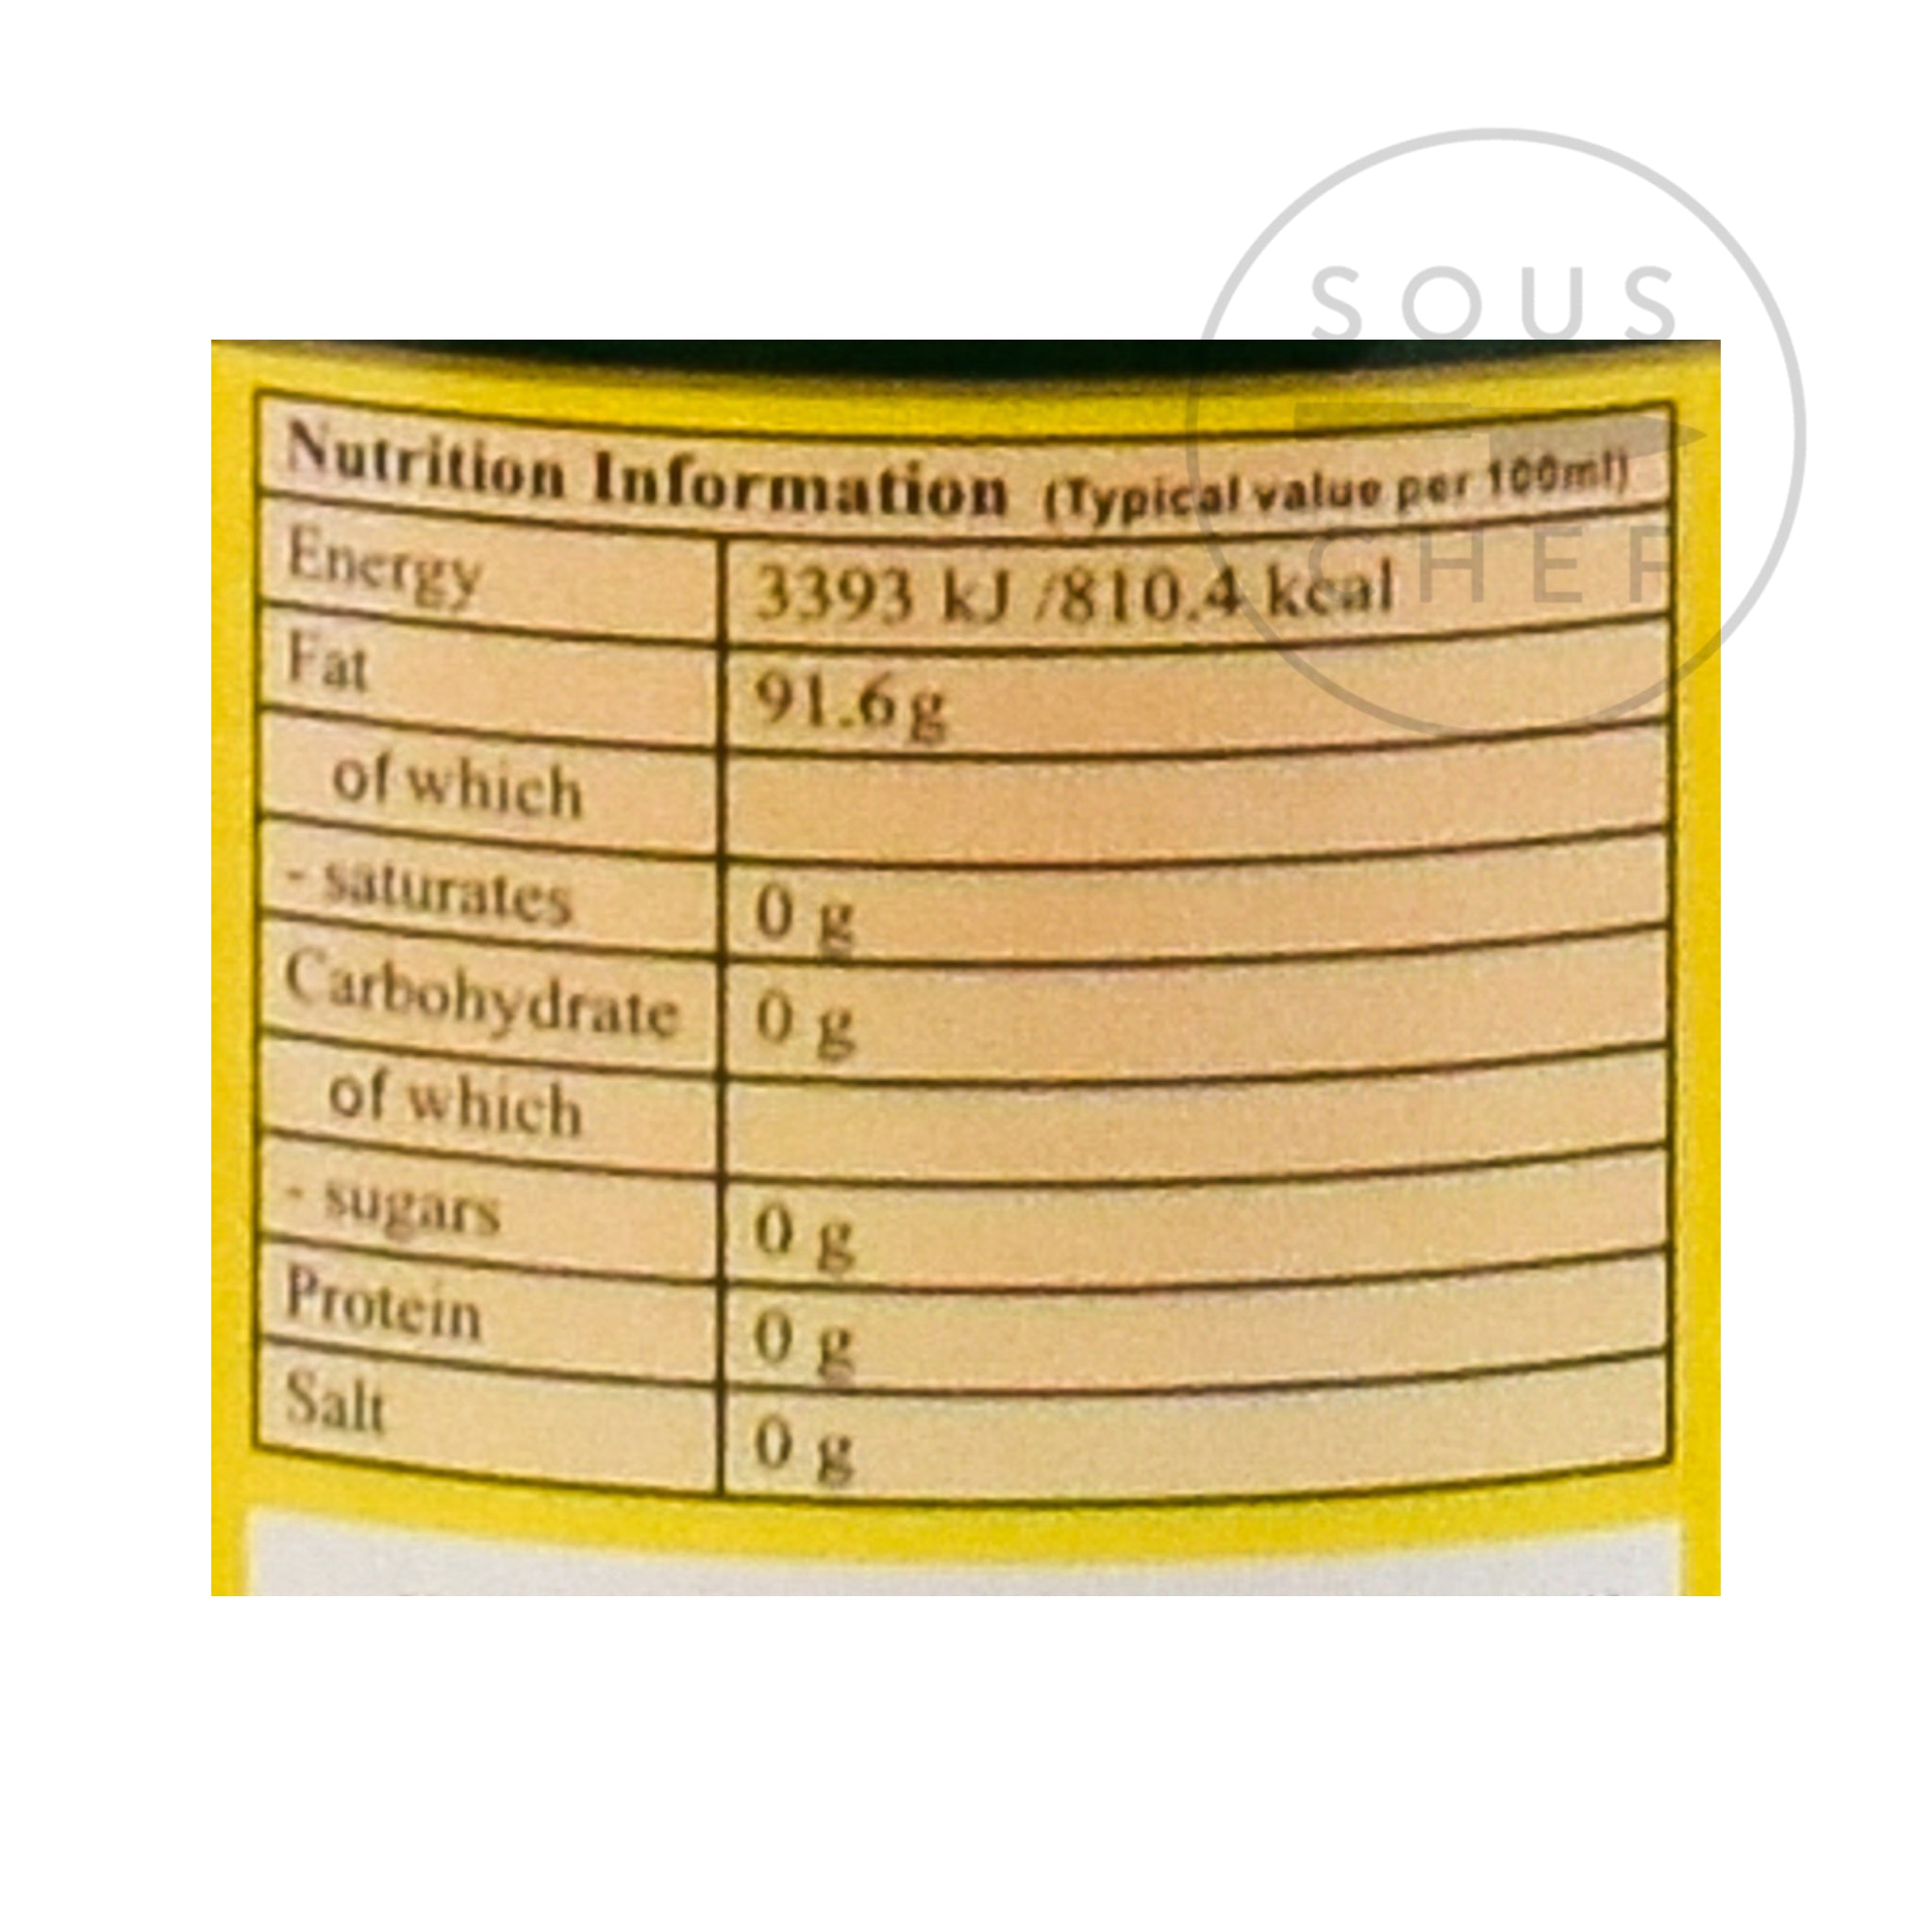 Sichuan Peppercorn Oil - Prickly Oil 210ml nutritional information